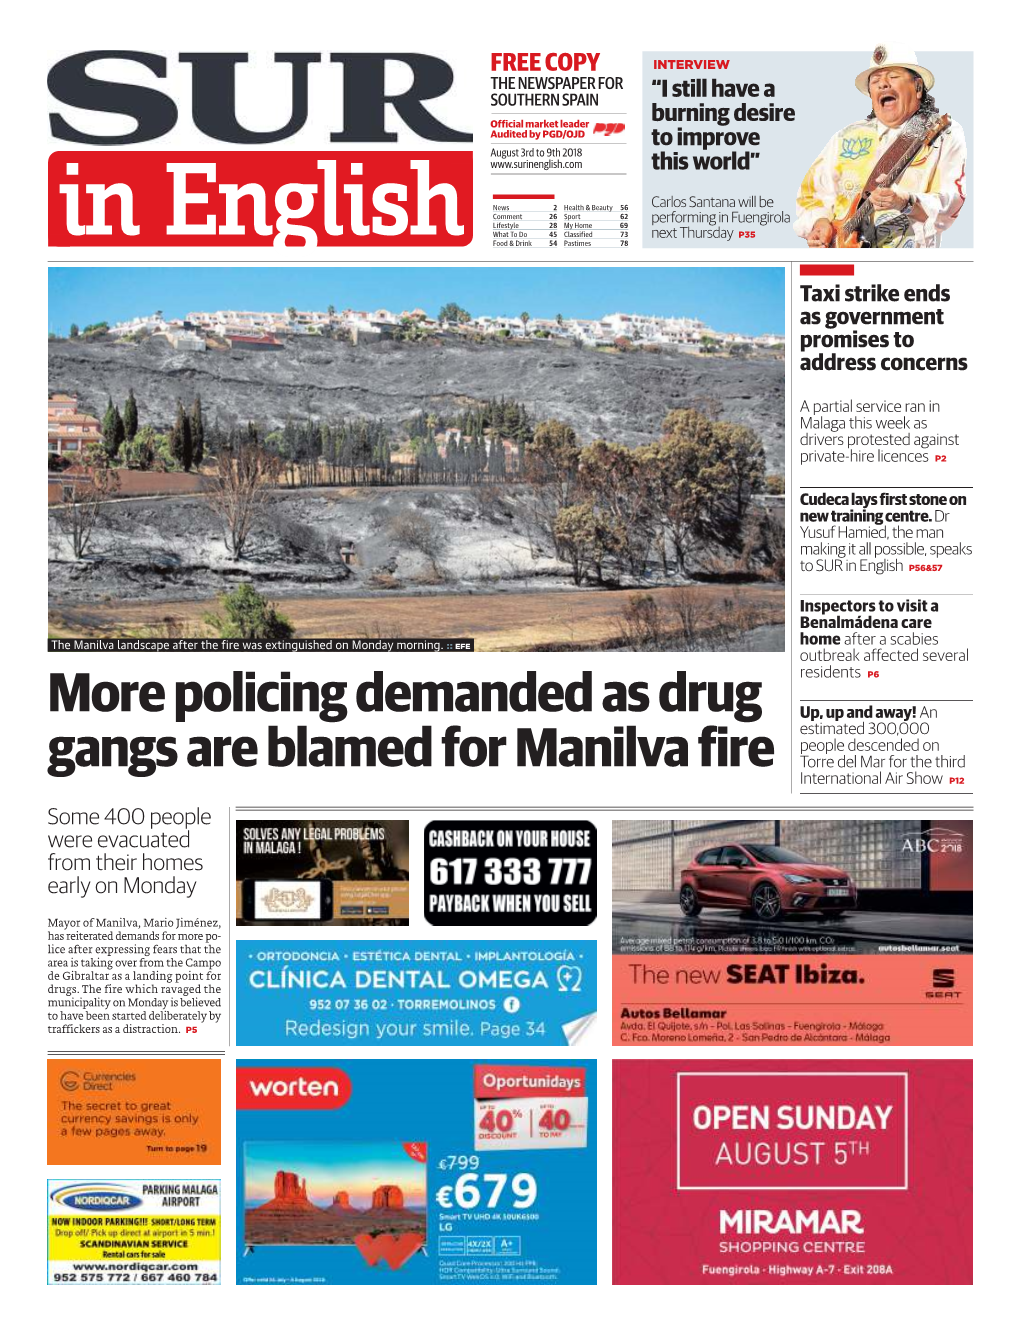 Policing Demanded As Drug Gangs Are